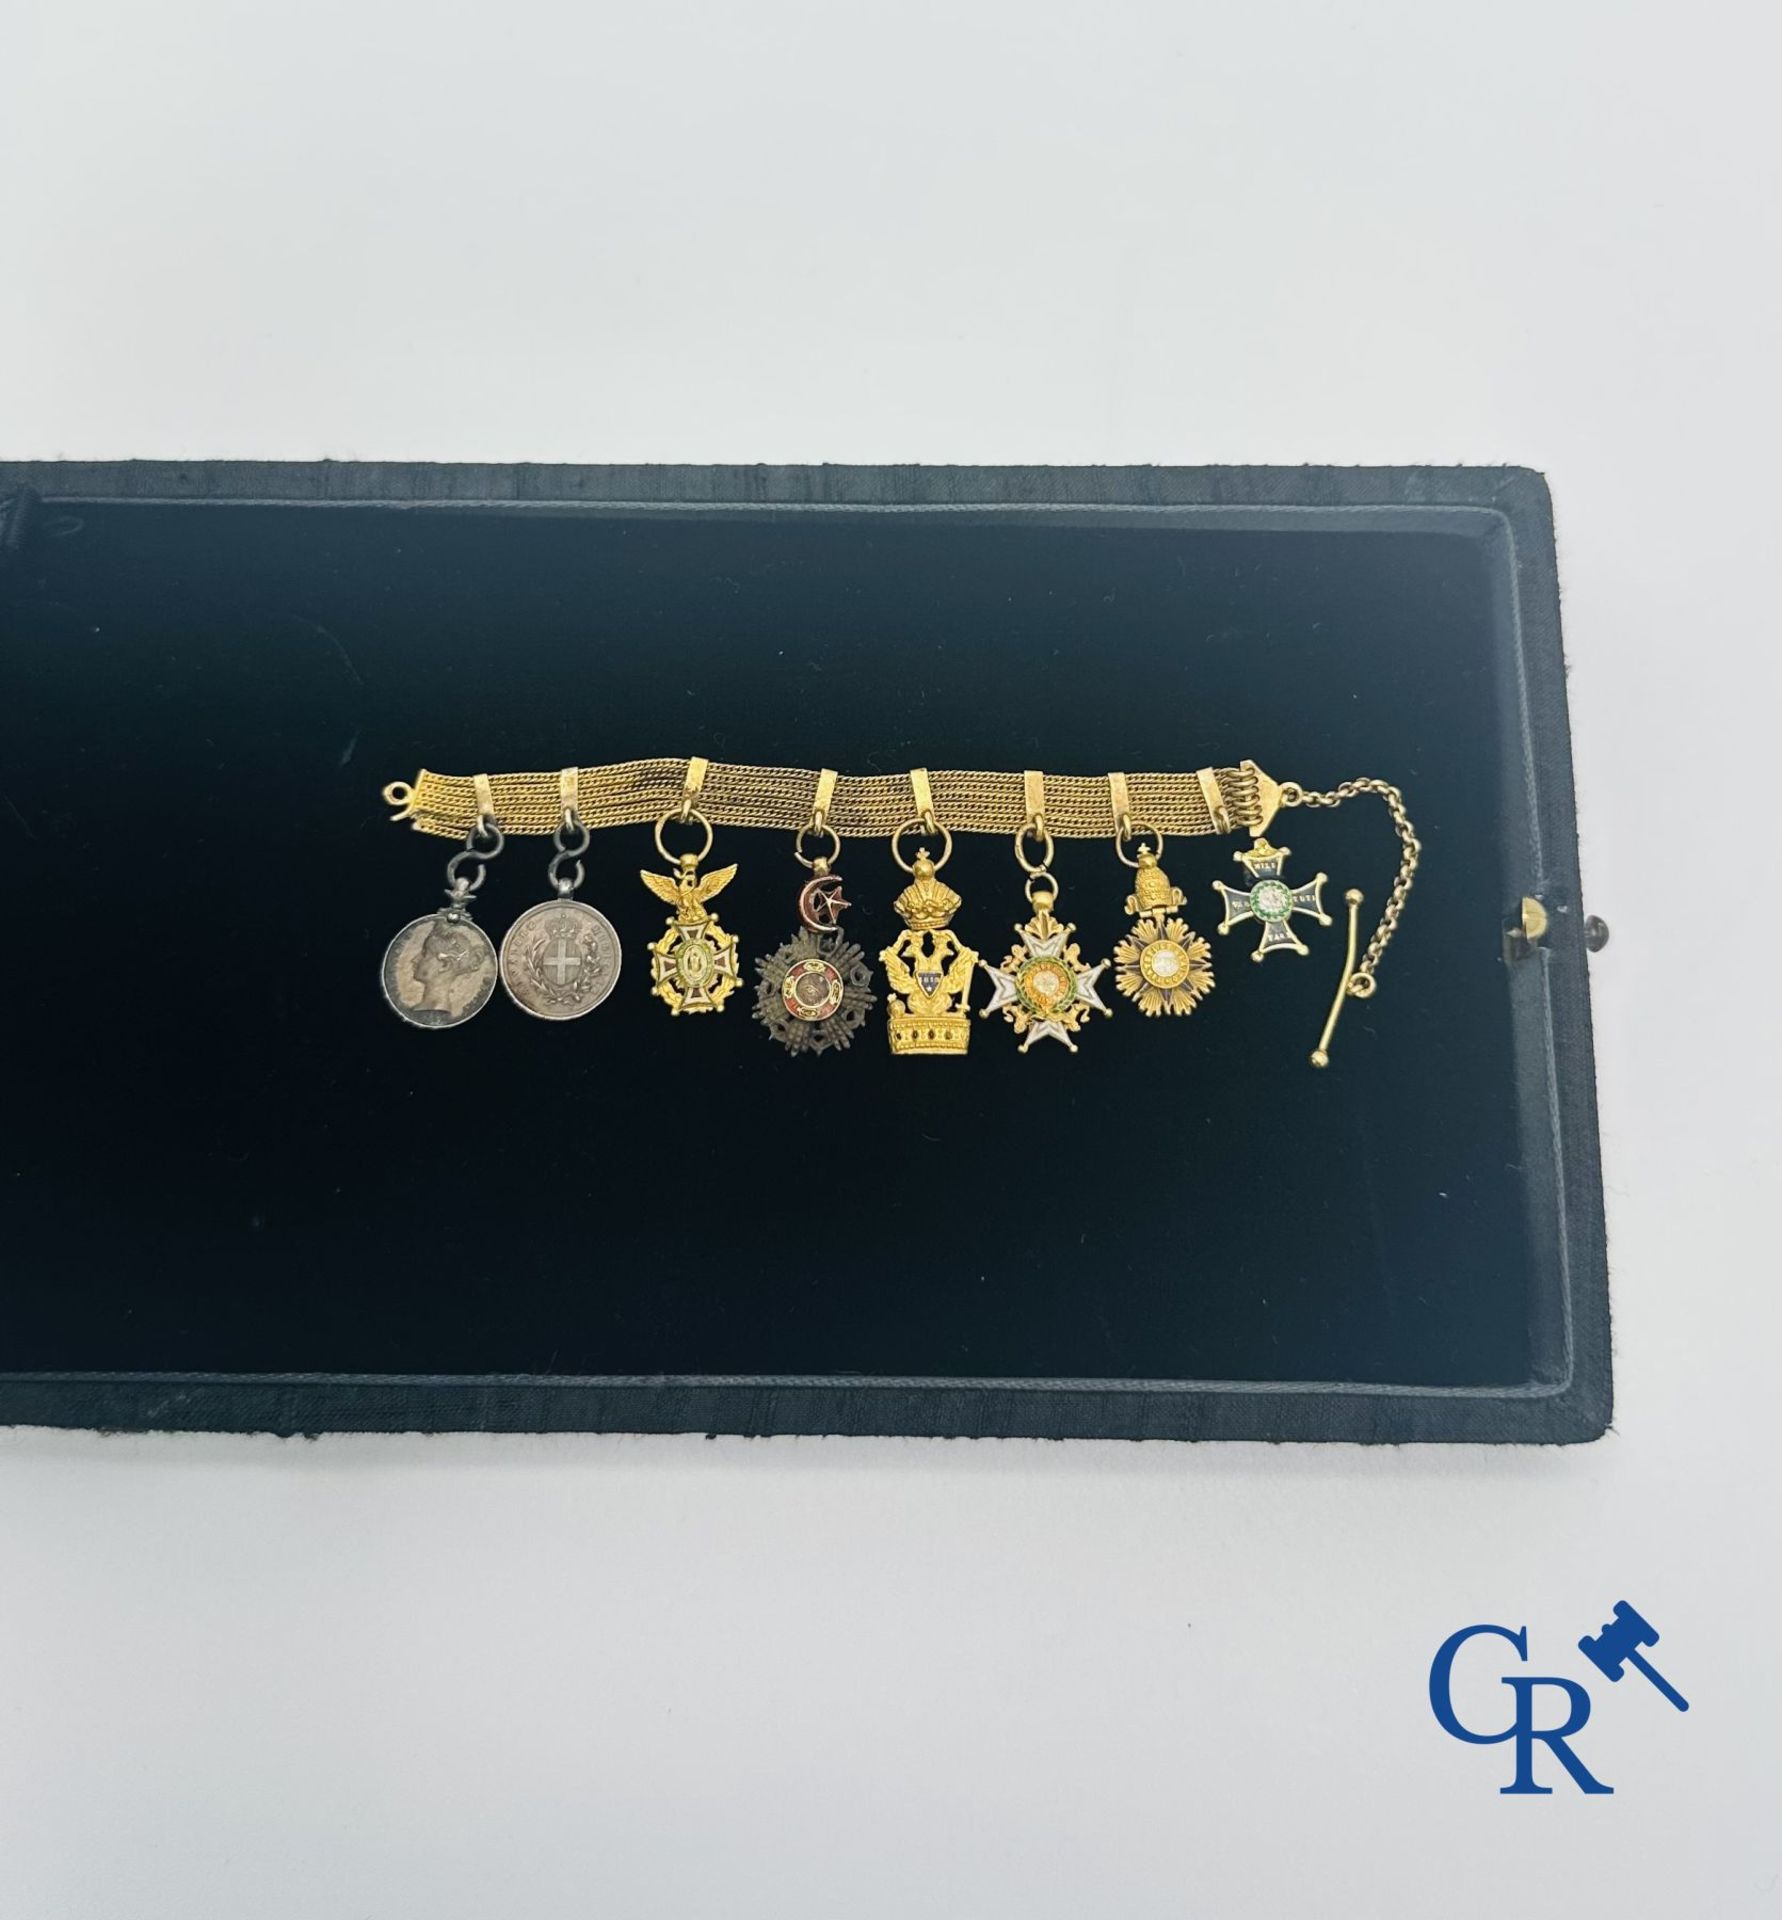 Medals - Order of the Crown Honorary Marks - Decorations: Miniature chain in gold 18K with various d - Image 3 of 3